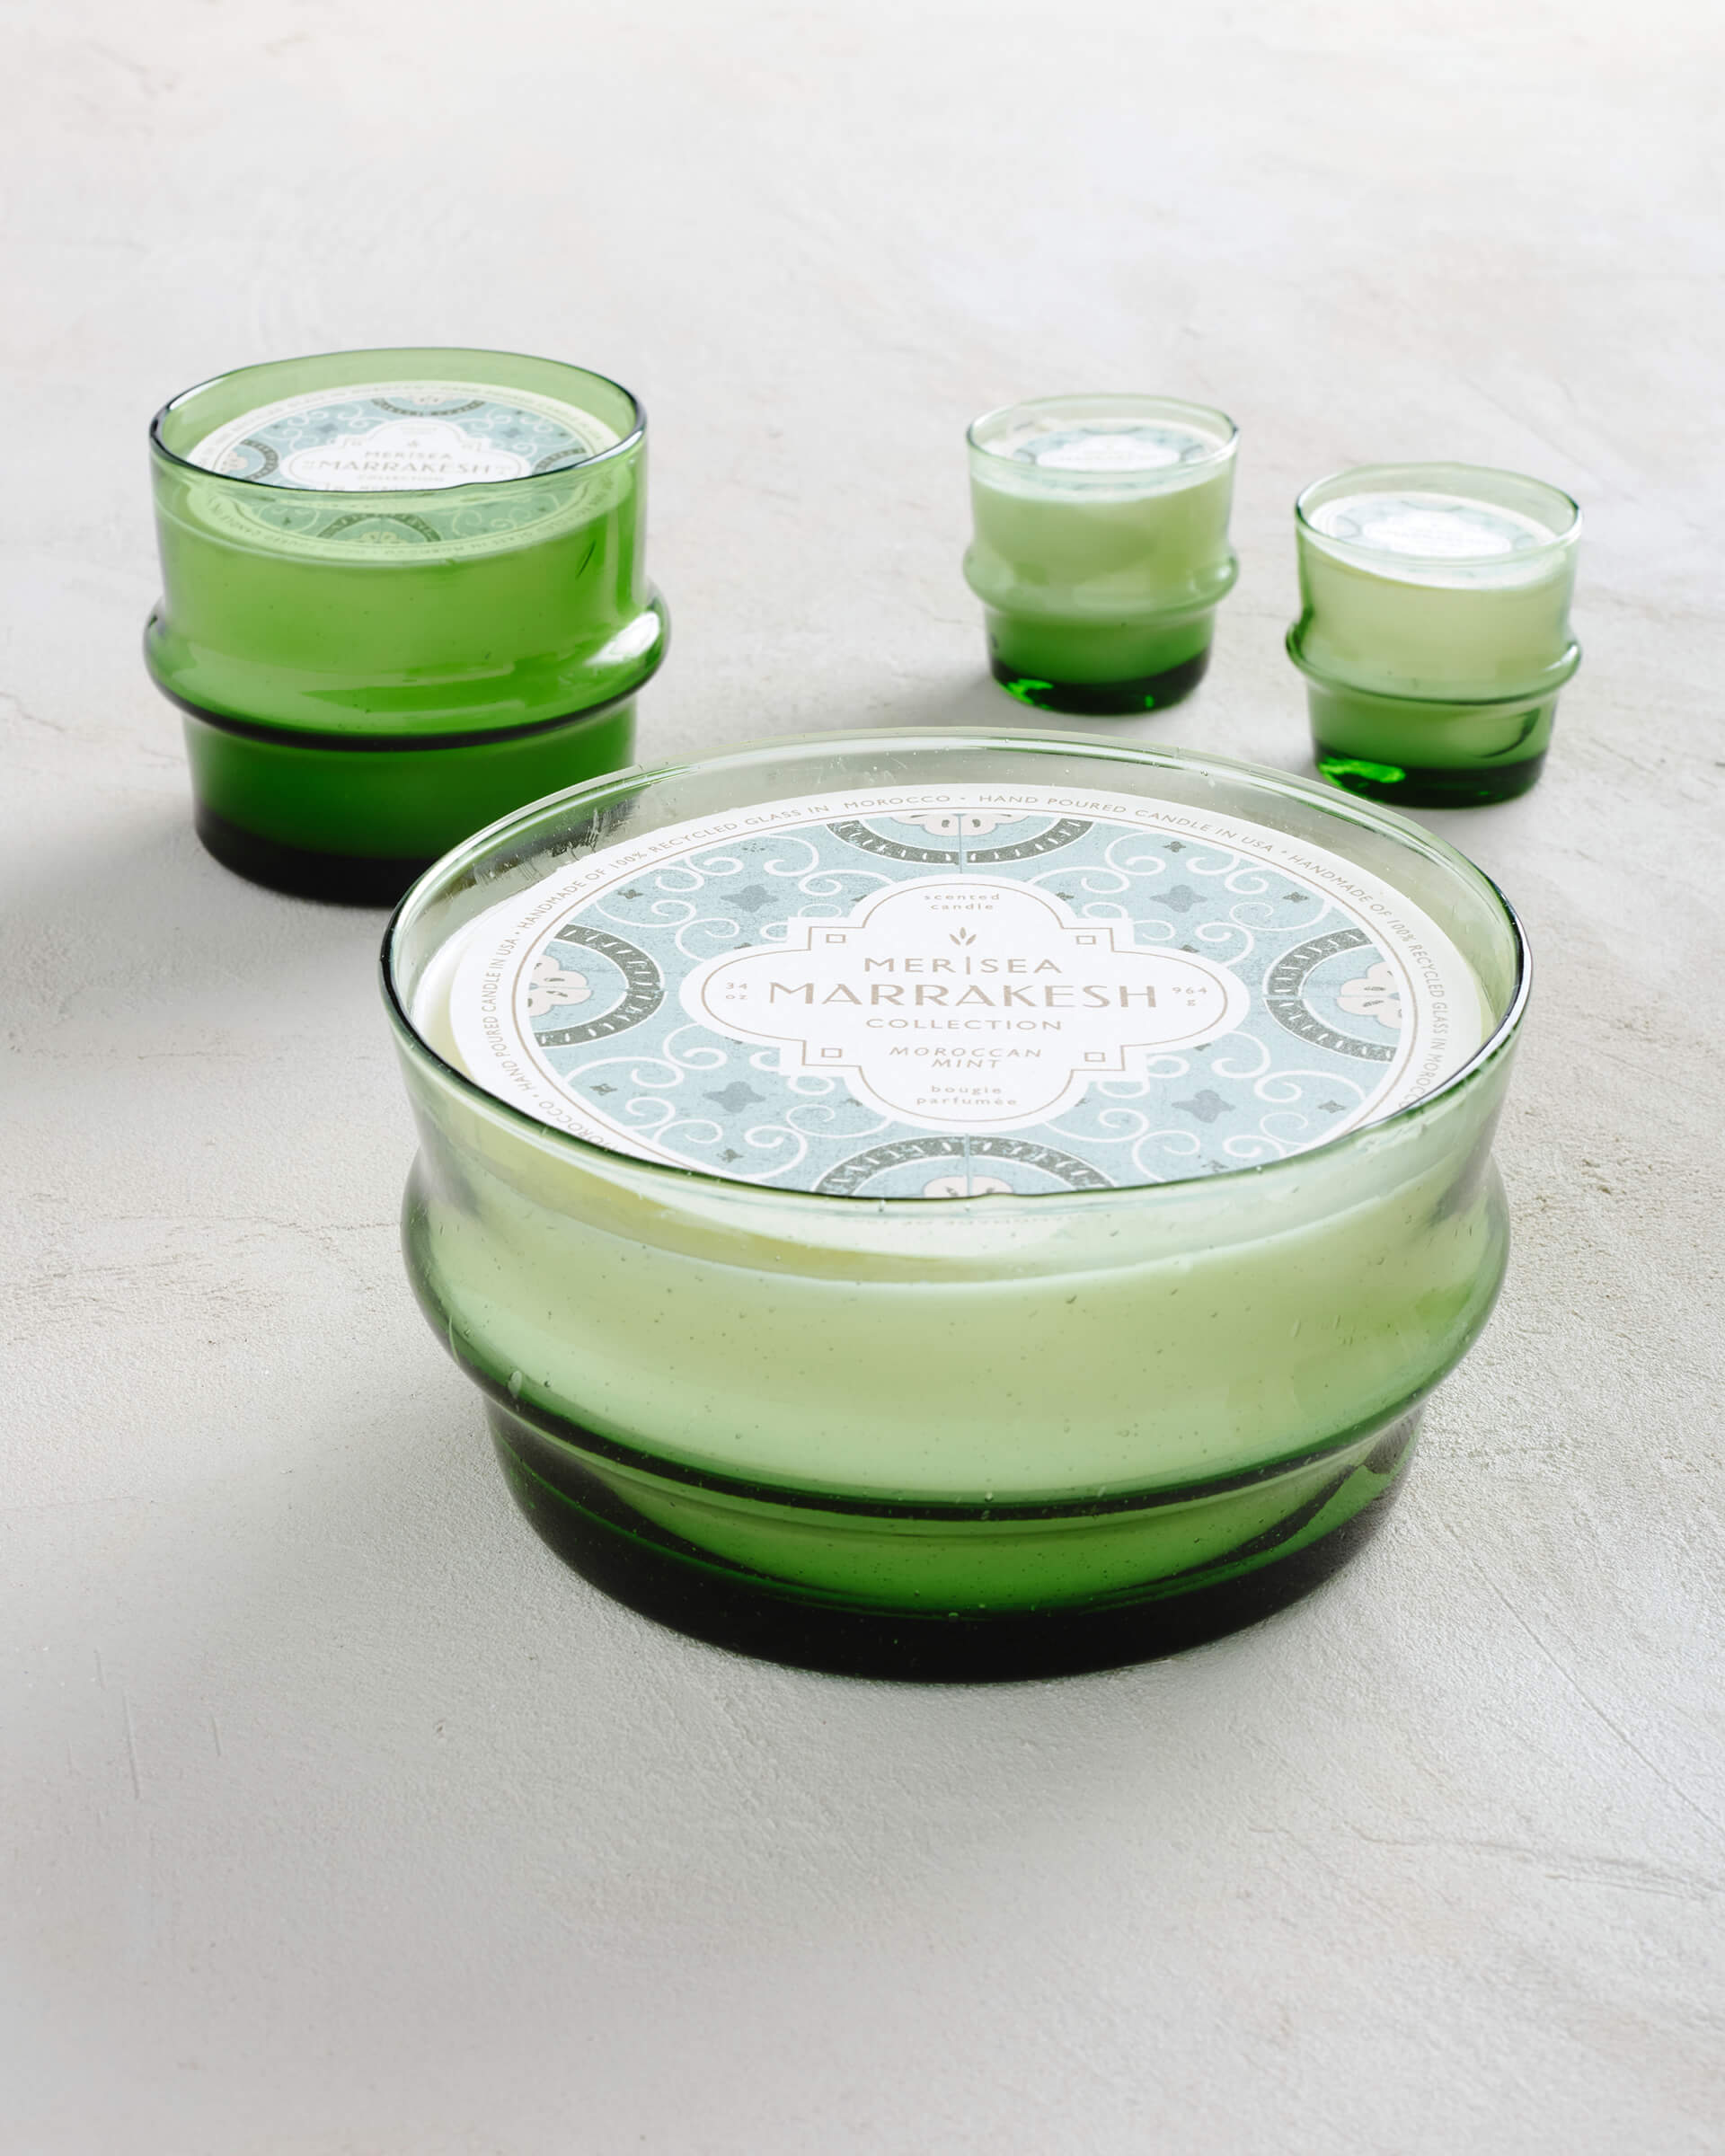 green glass Moroccan Mint candle bowl sitting near short and tall glass candles on white background